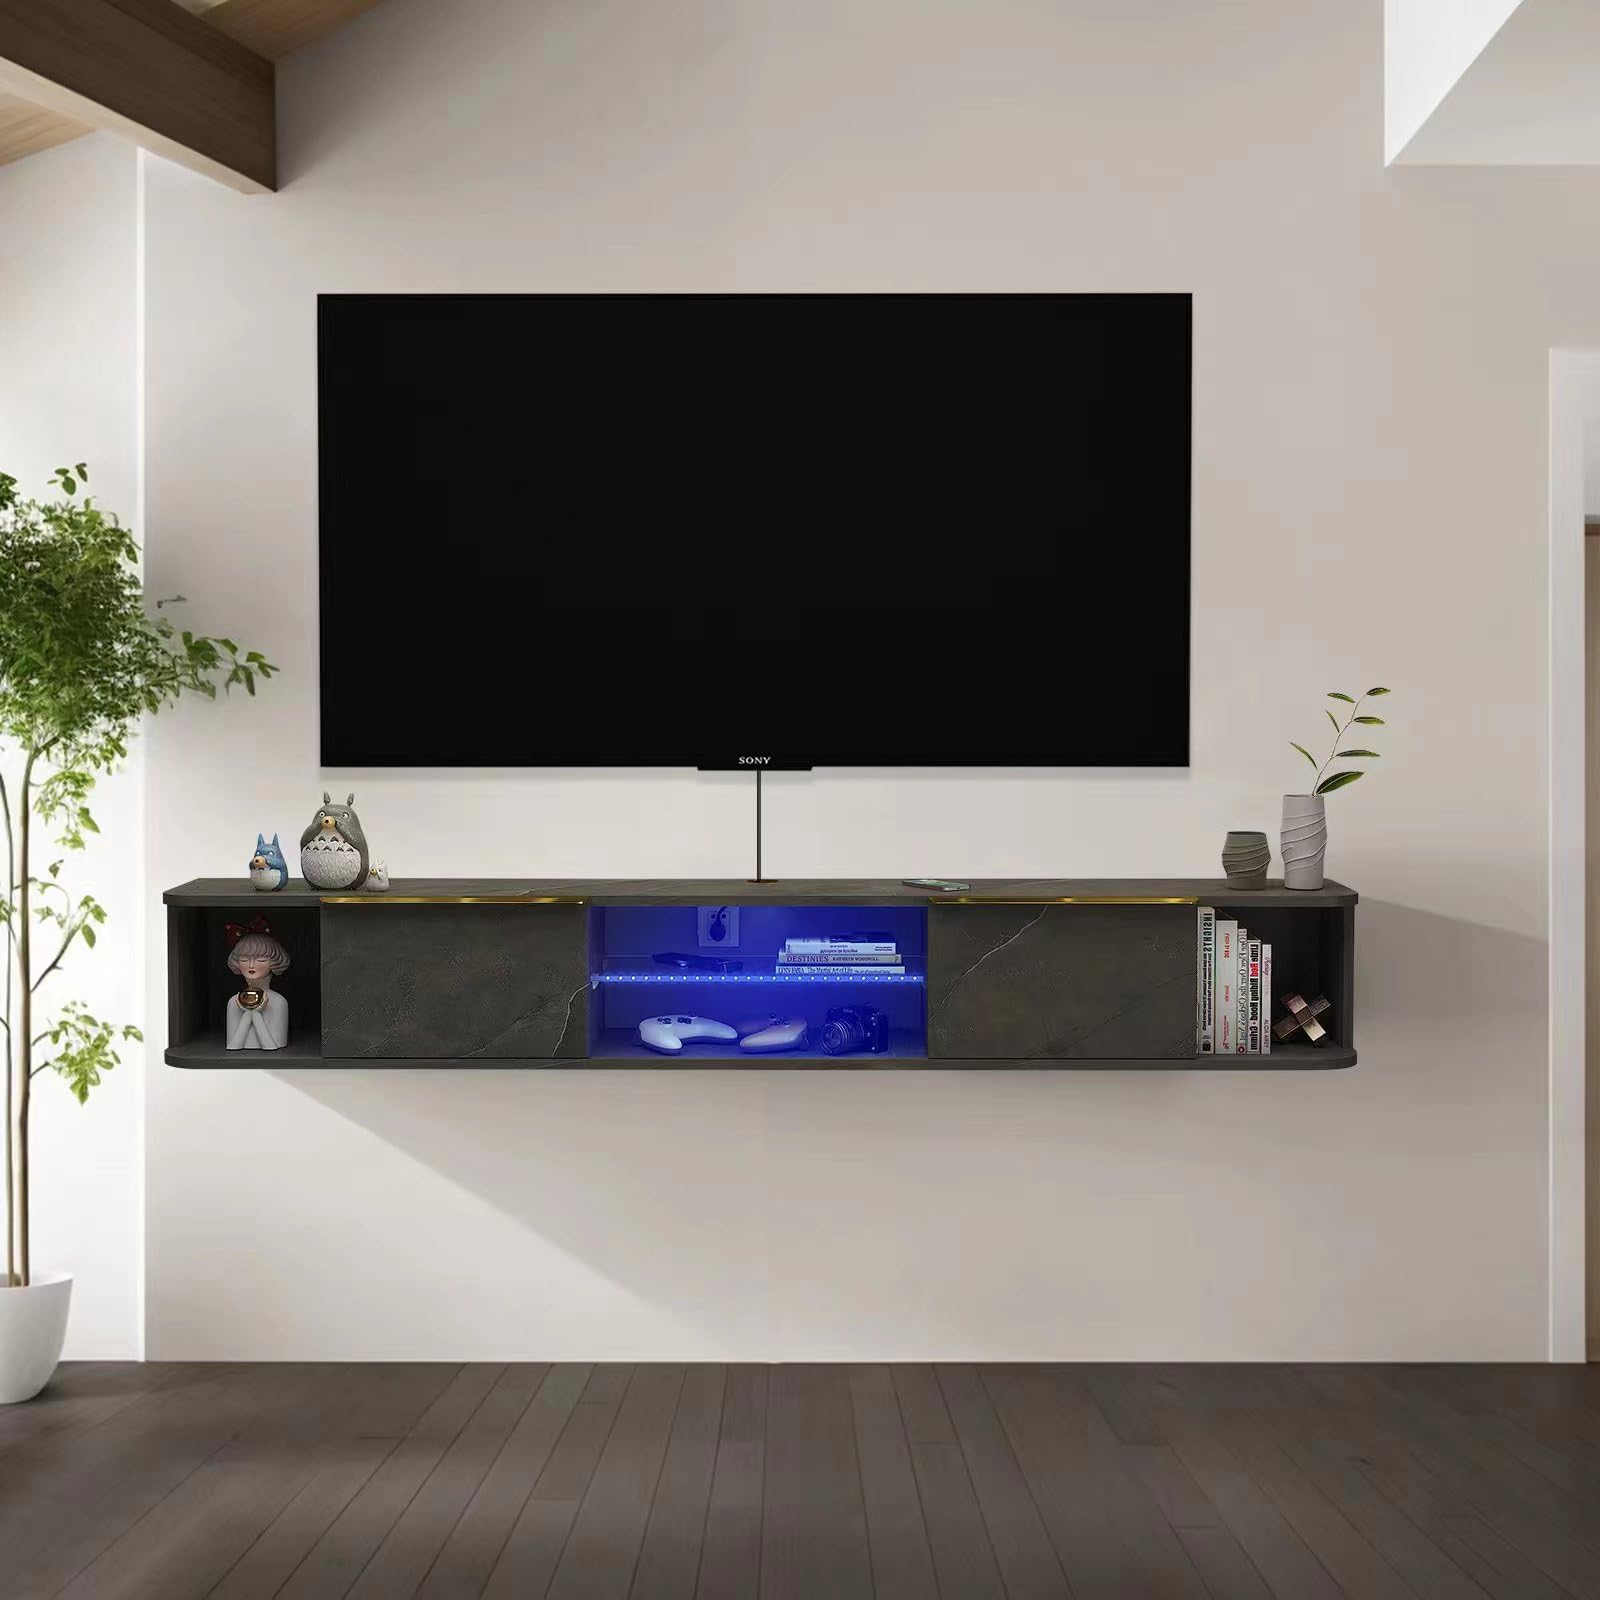 63" Modern Plywood Floating TV Stand for 65" 70" TVs with LED Lights, Dark Grey